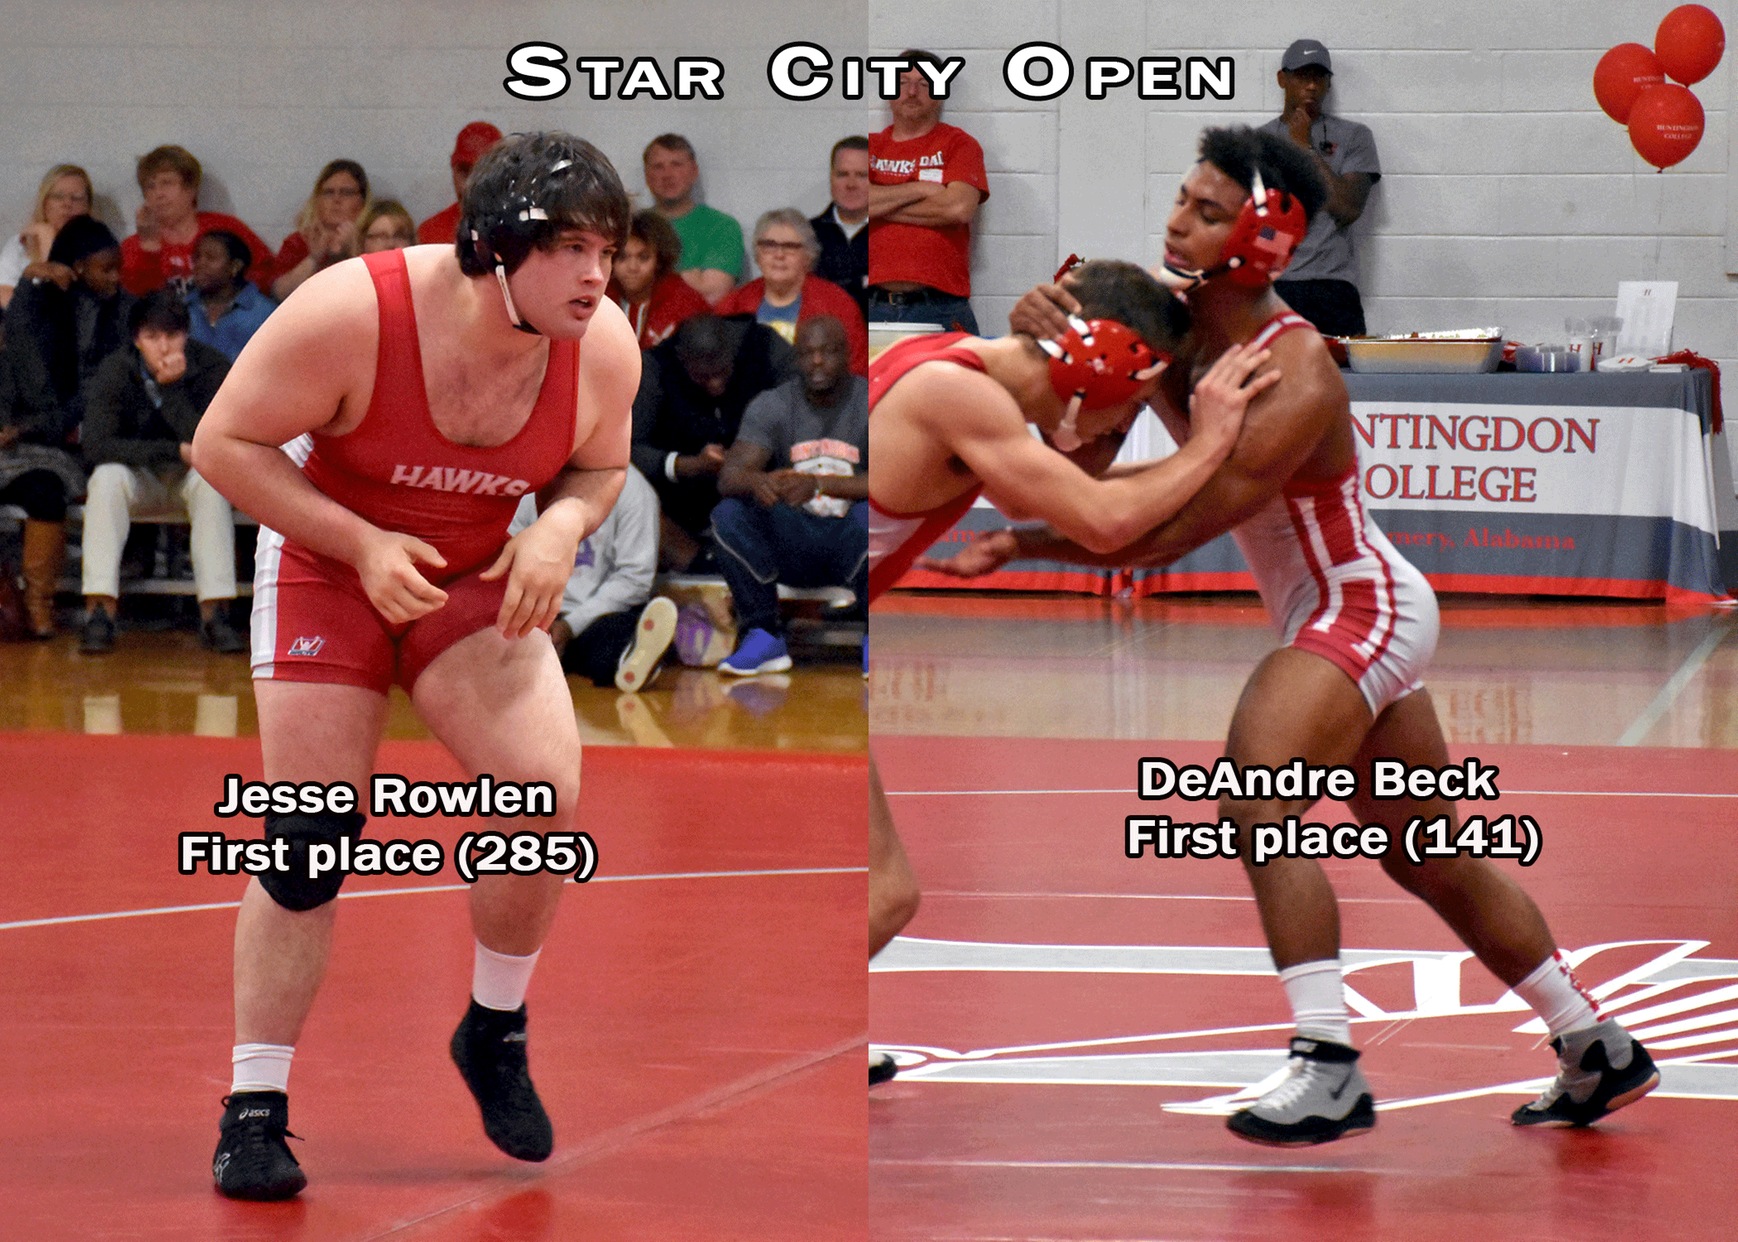 Jesse Rowlen and DeAndre Beck each won their weight classes to help the Huntingdon wrestling team place third in the Star City Open on Sunday.